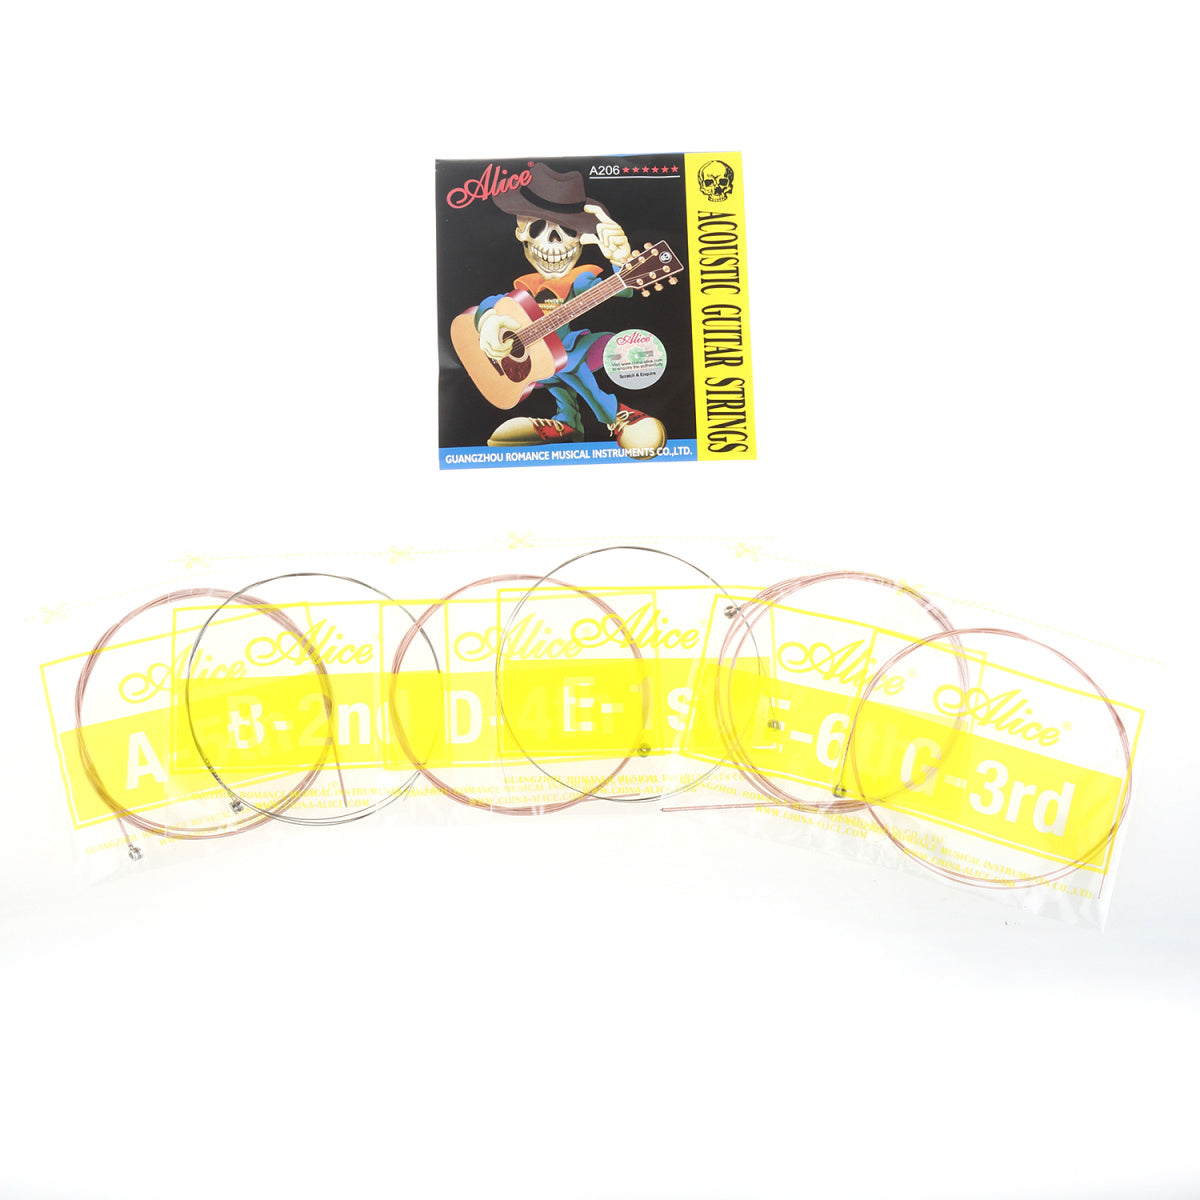 Musiclily Alice Stainless Steel Acoustic Guitar Strings Set with Nickel-Plated Ball-End